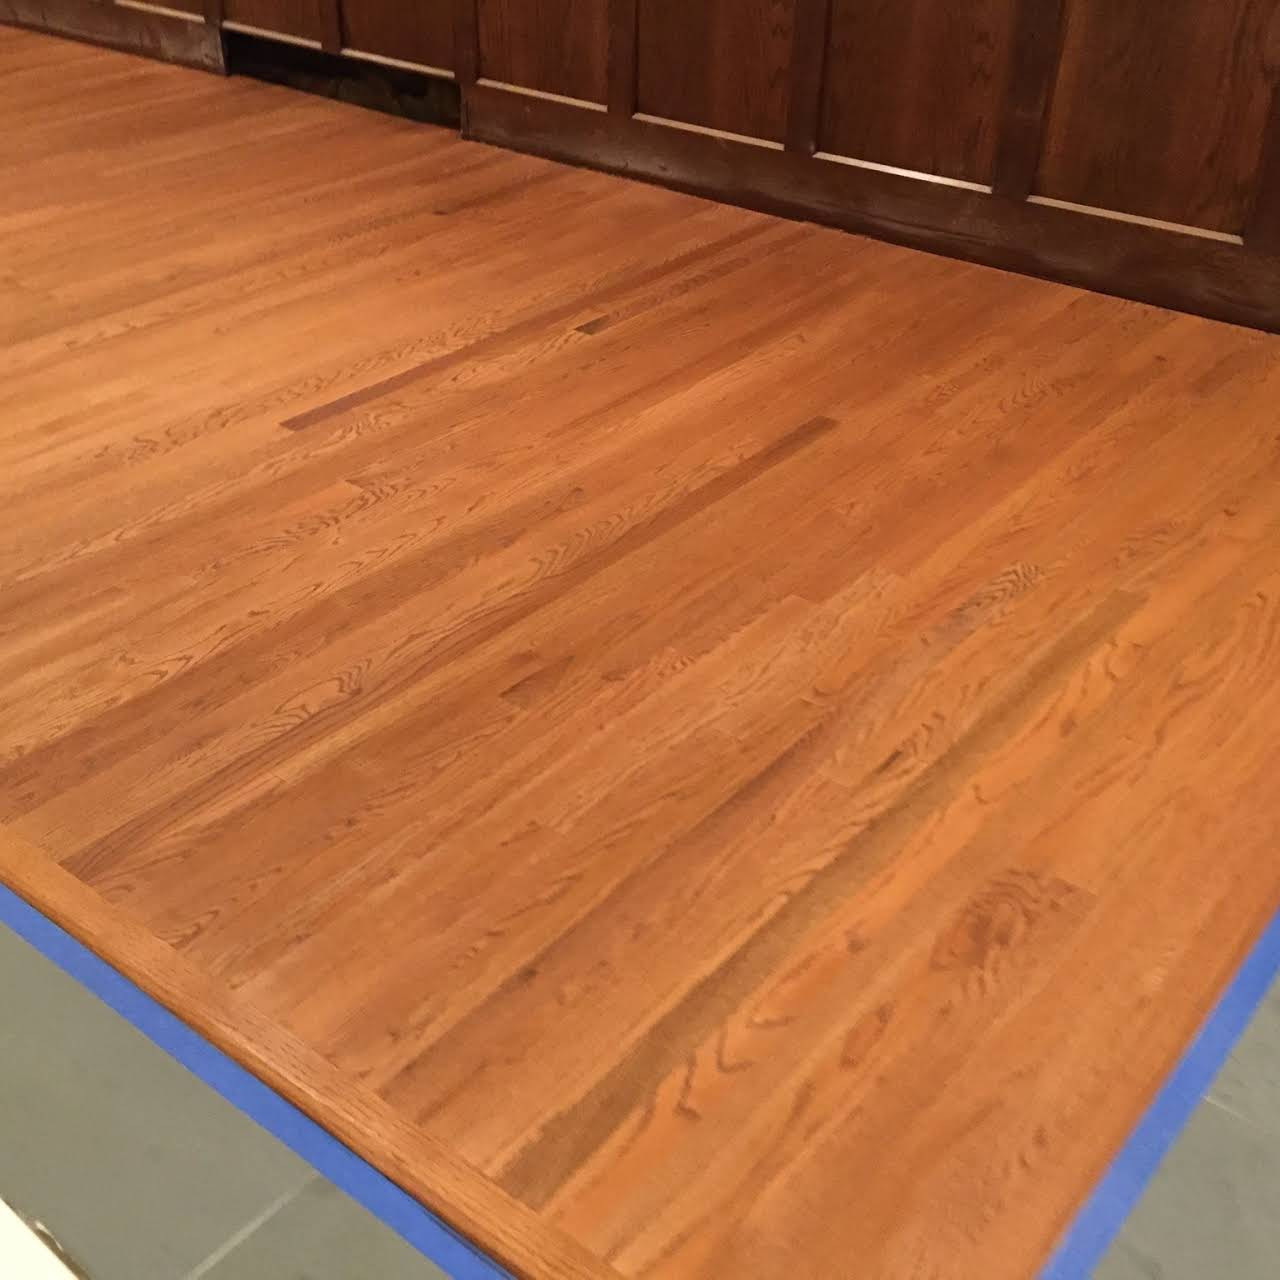 23 Lovely Hardwood Floor Repair Estimate 2024 free download hardwood floor repair estimate of james hardwood floorsa llc local contractor no retail price again with regard to are you looking f